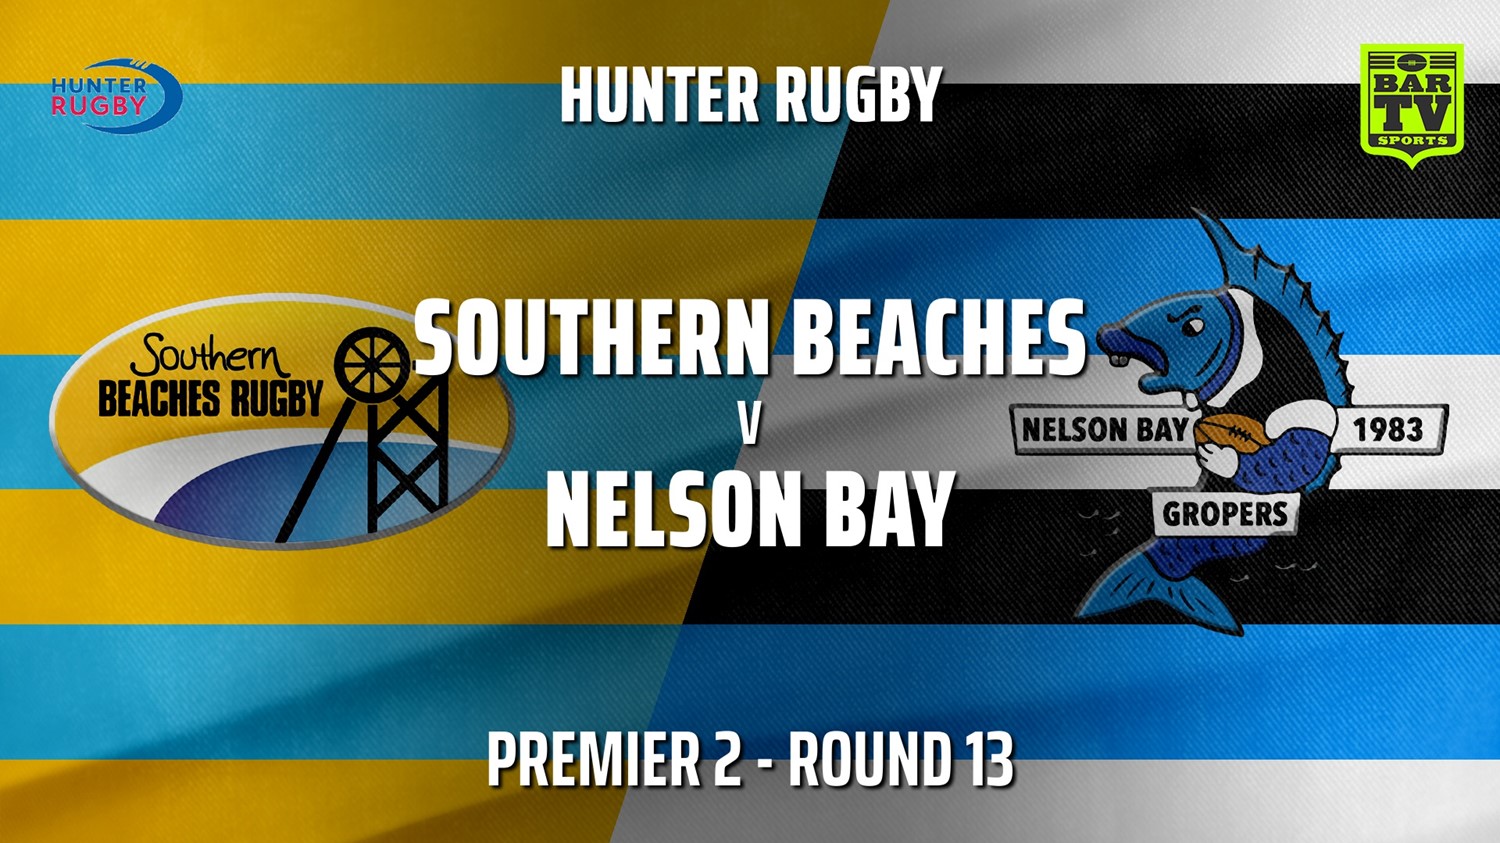 210717-Hunter Rugby Round 13 - Premier 2 - Southern Beaches v Nelson Bay Gropers Slate Image